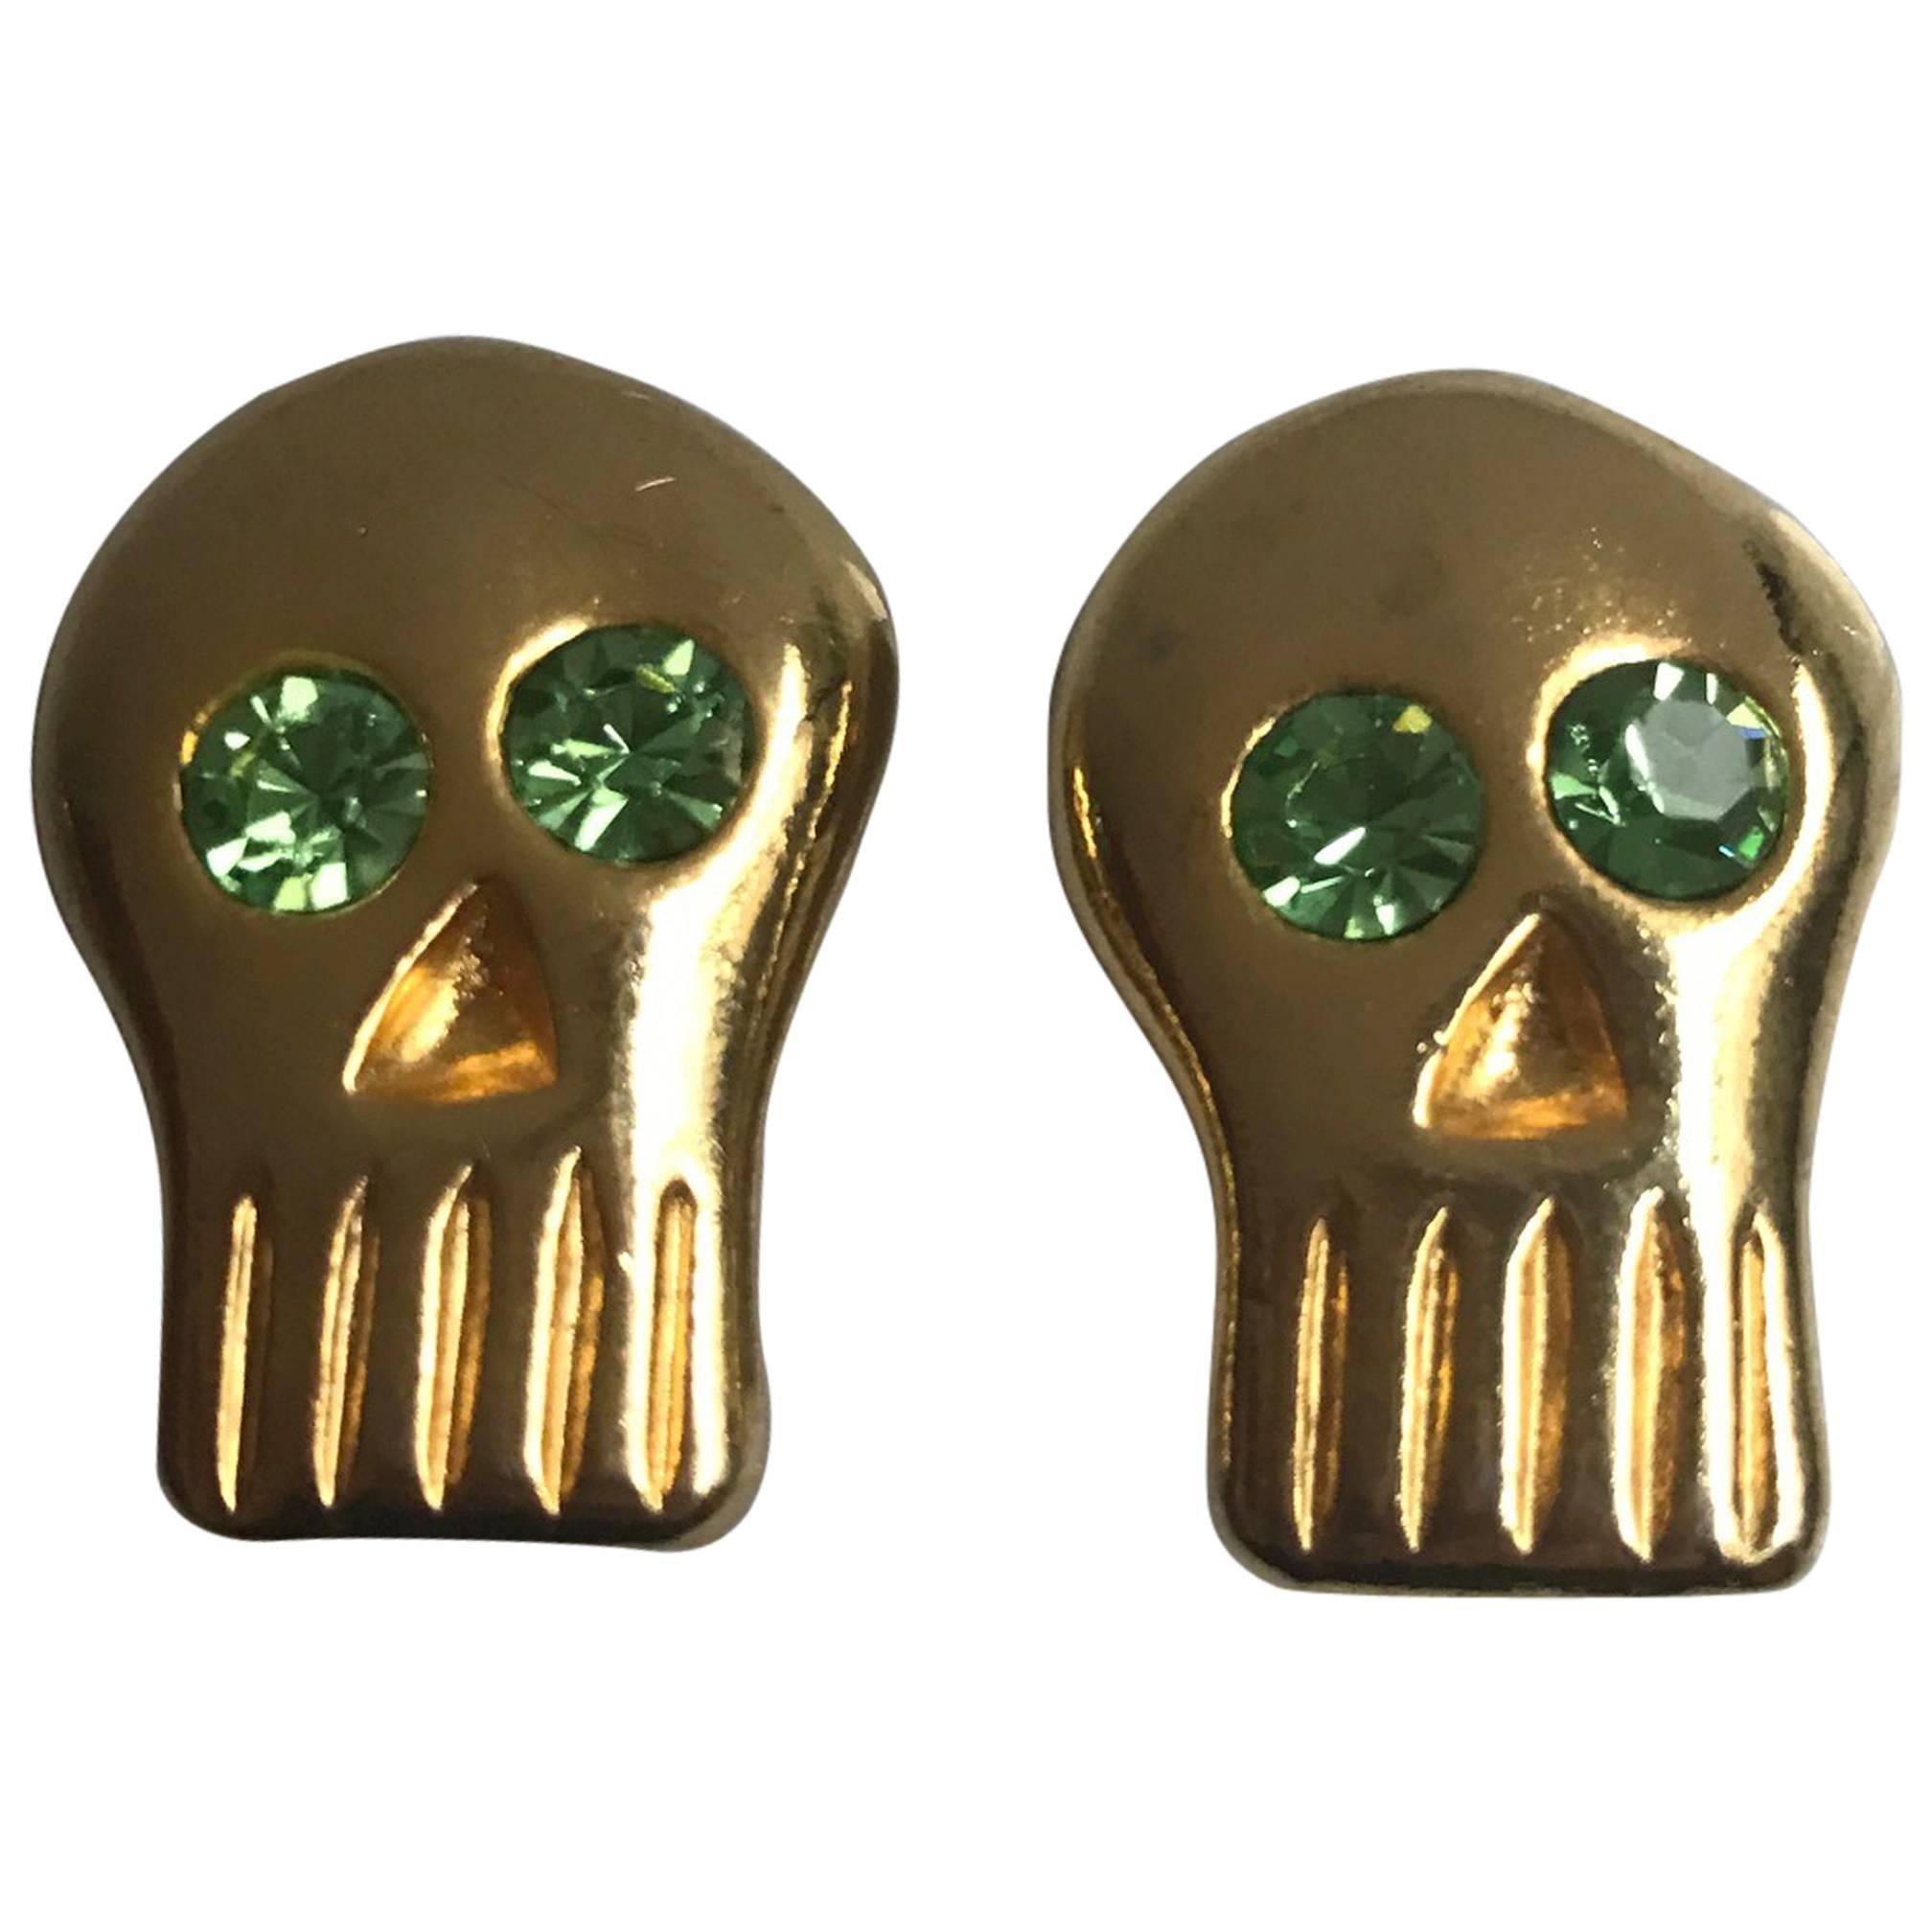 1980s BillyBoy* Surreal Bijoux Gold Tone and Green Crystal Skull Earrings